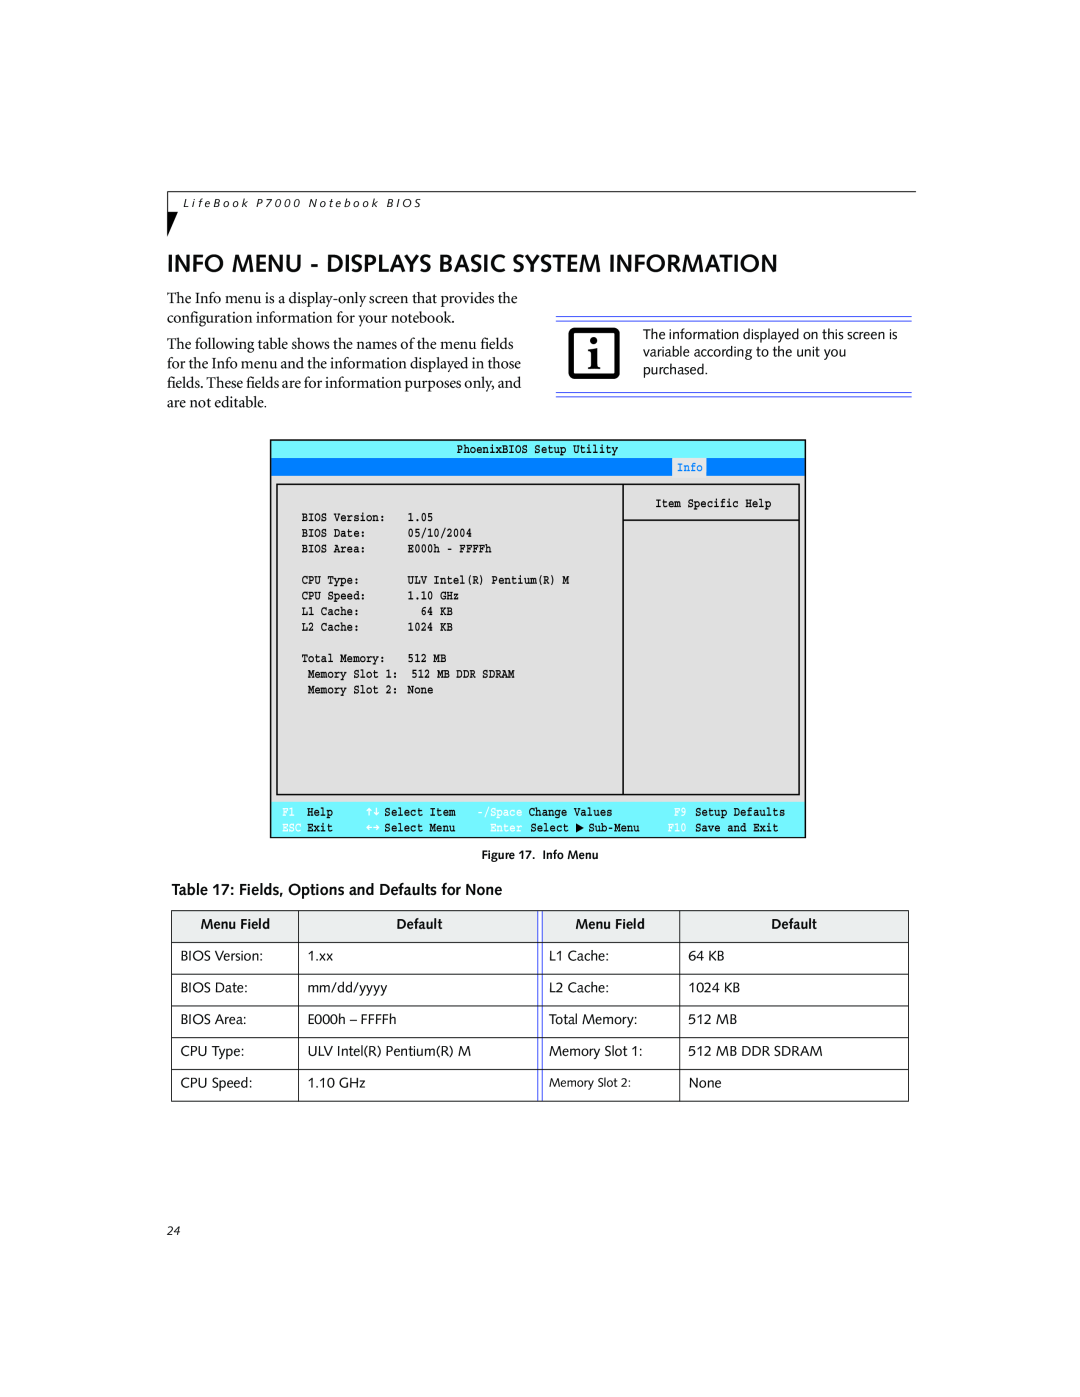 Fujitsu P7010D manual Info Menu - Displays Basic System Information, Fields, Options and Defaults for None 